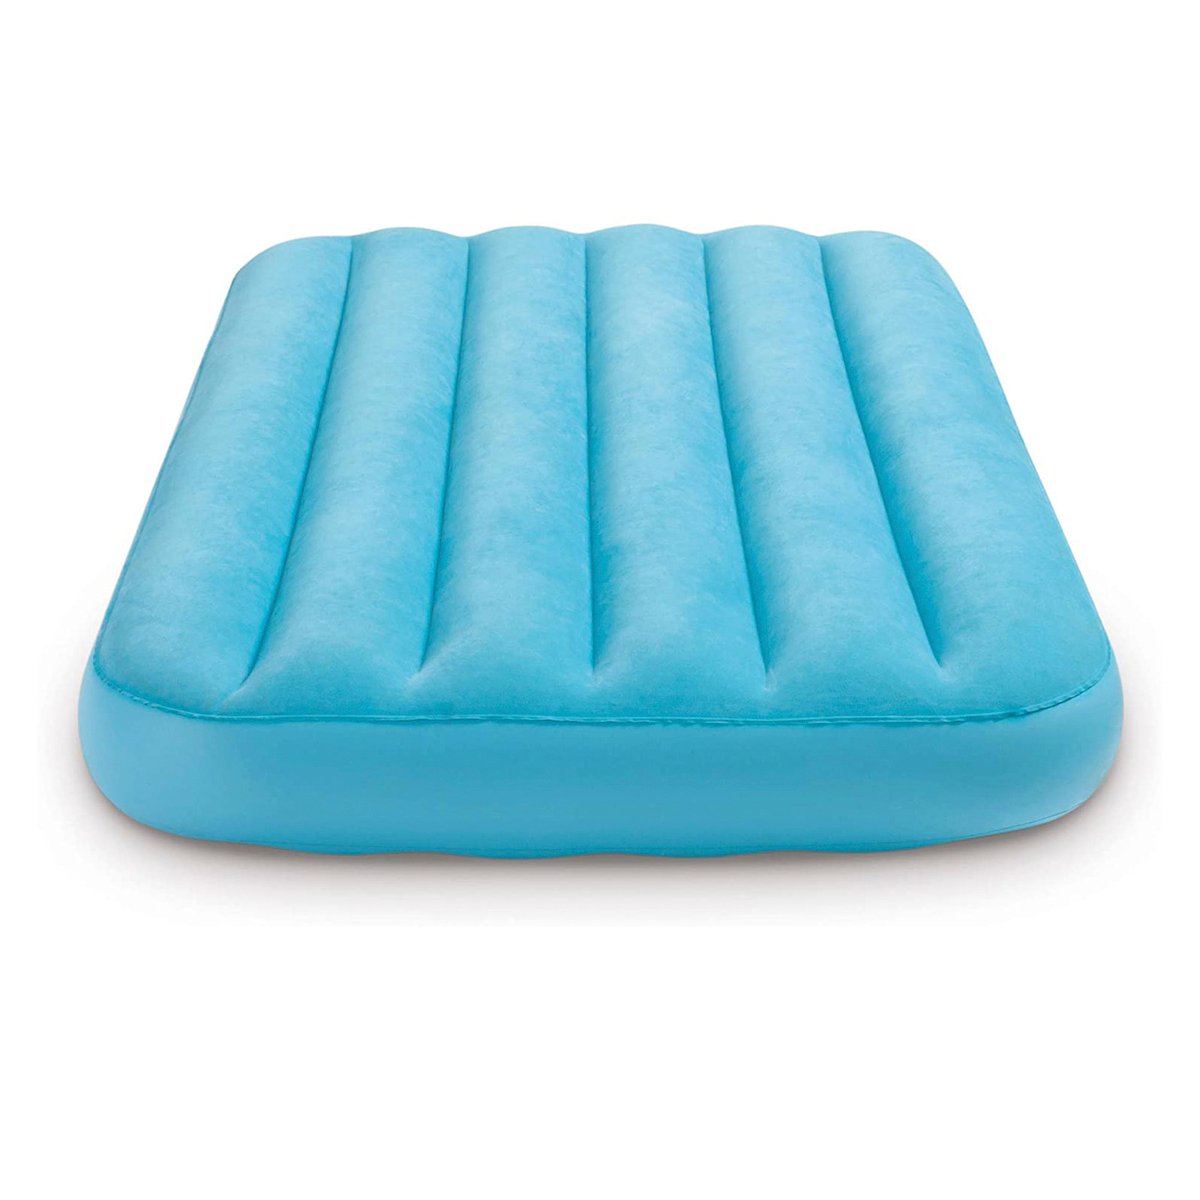 Intex Cozy Kidz Inflatable Airbed 66803 (Color May Vary)